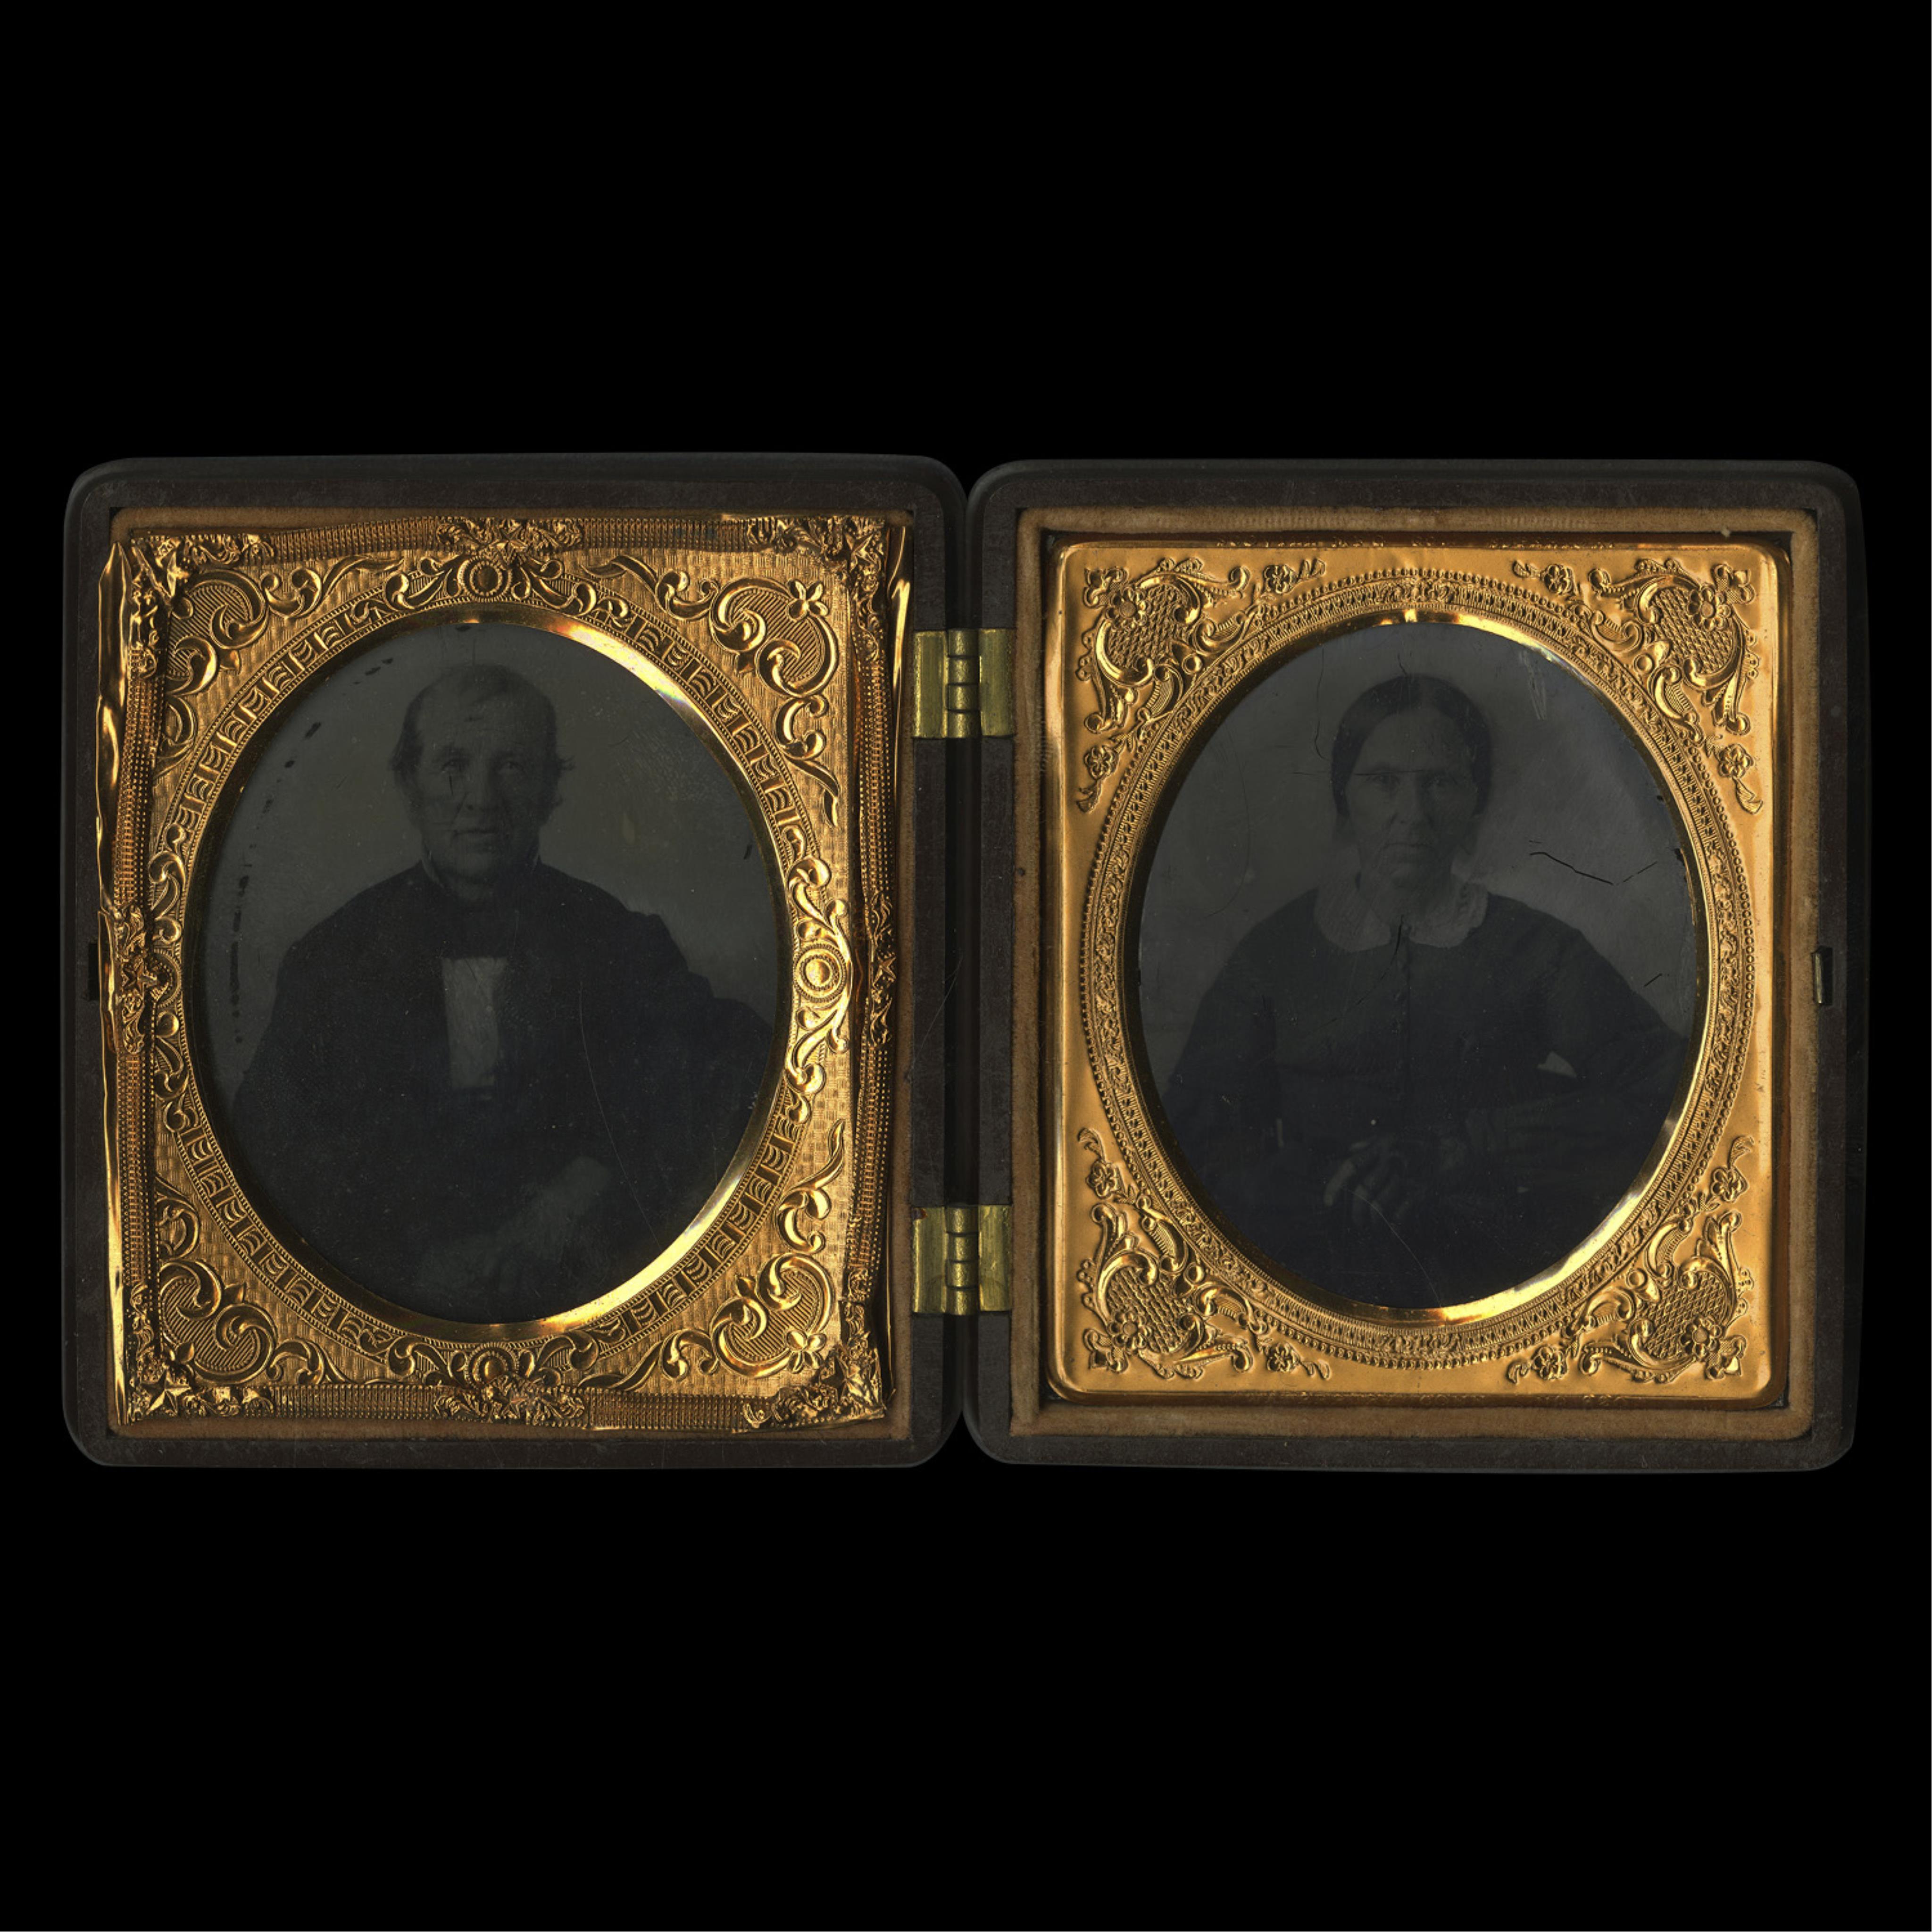 2 Gutta-Percha Cases w/ Tintypes of Couples - Image 4 of 8